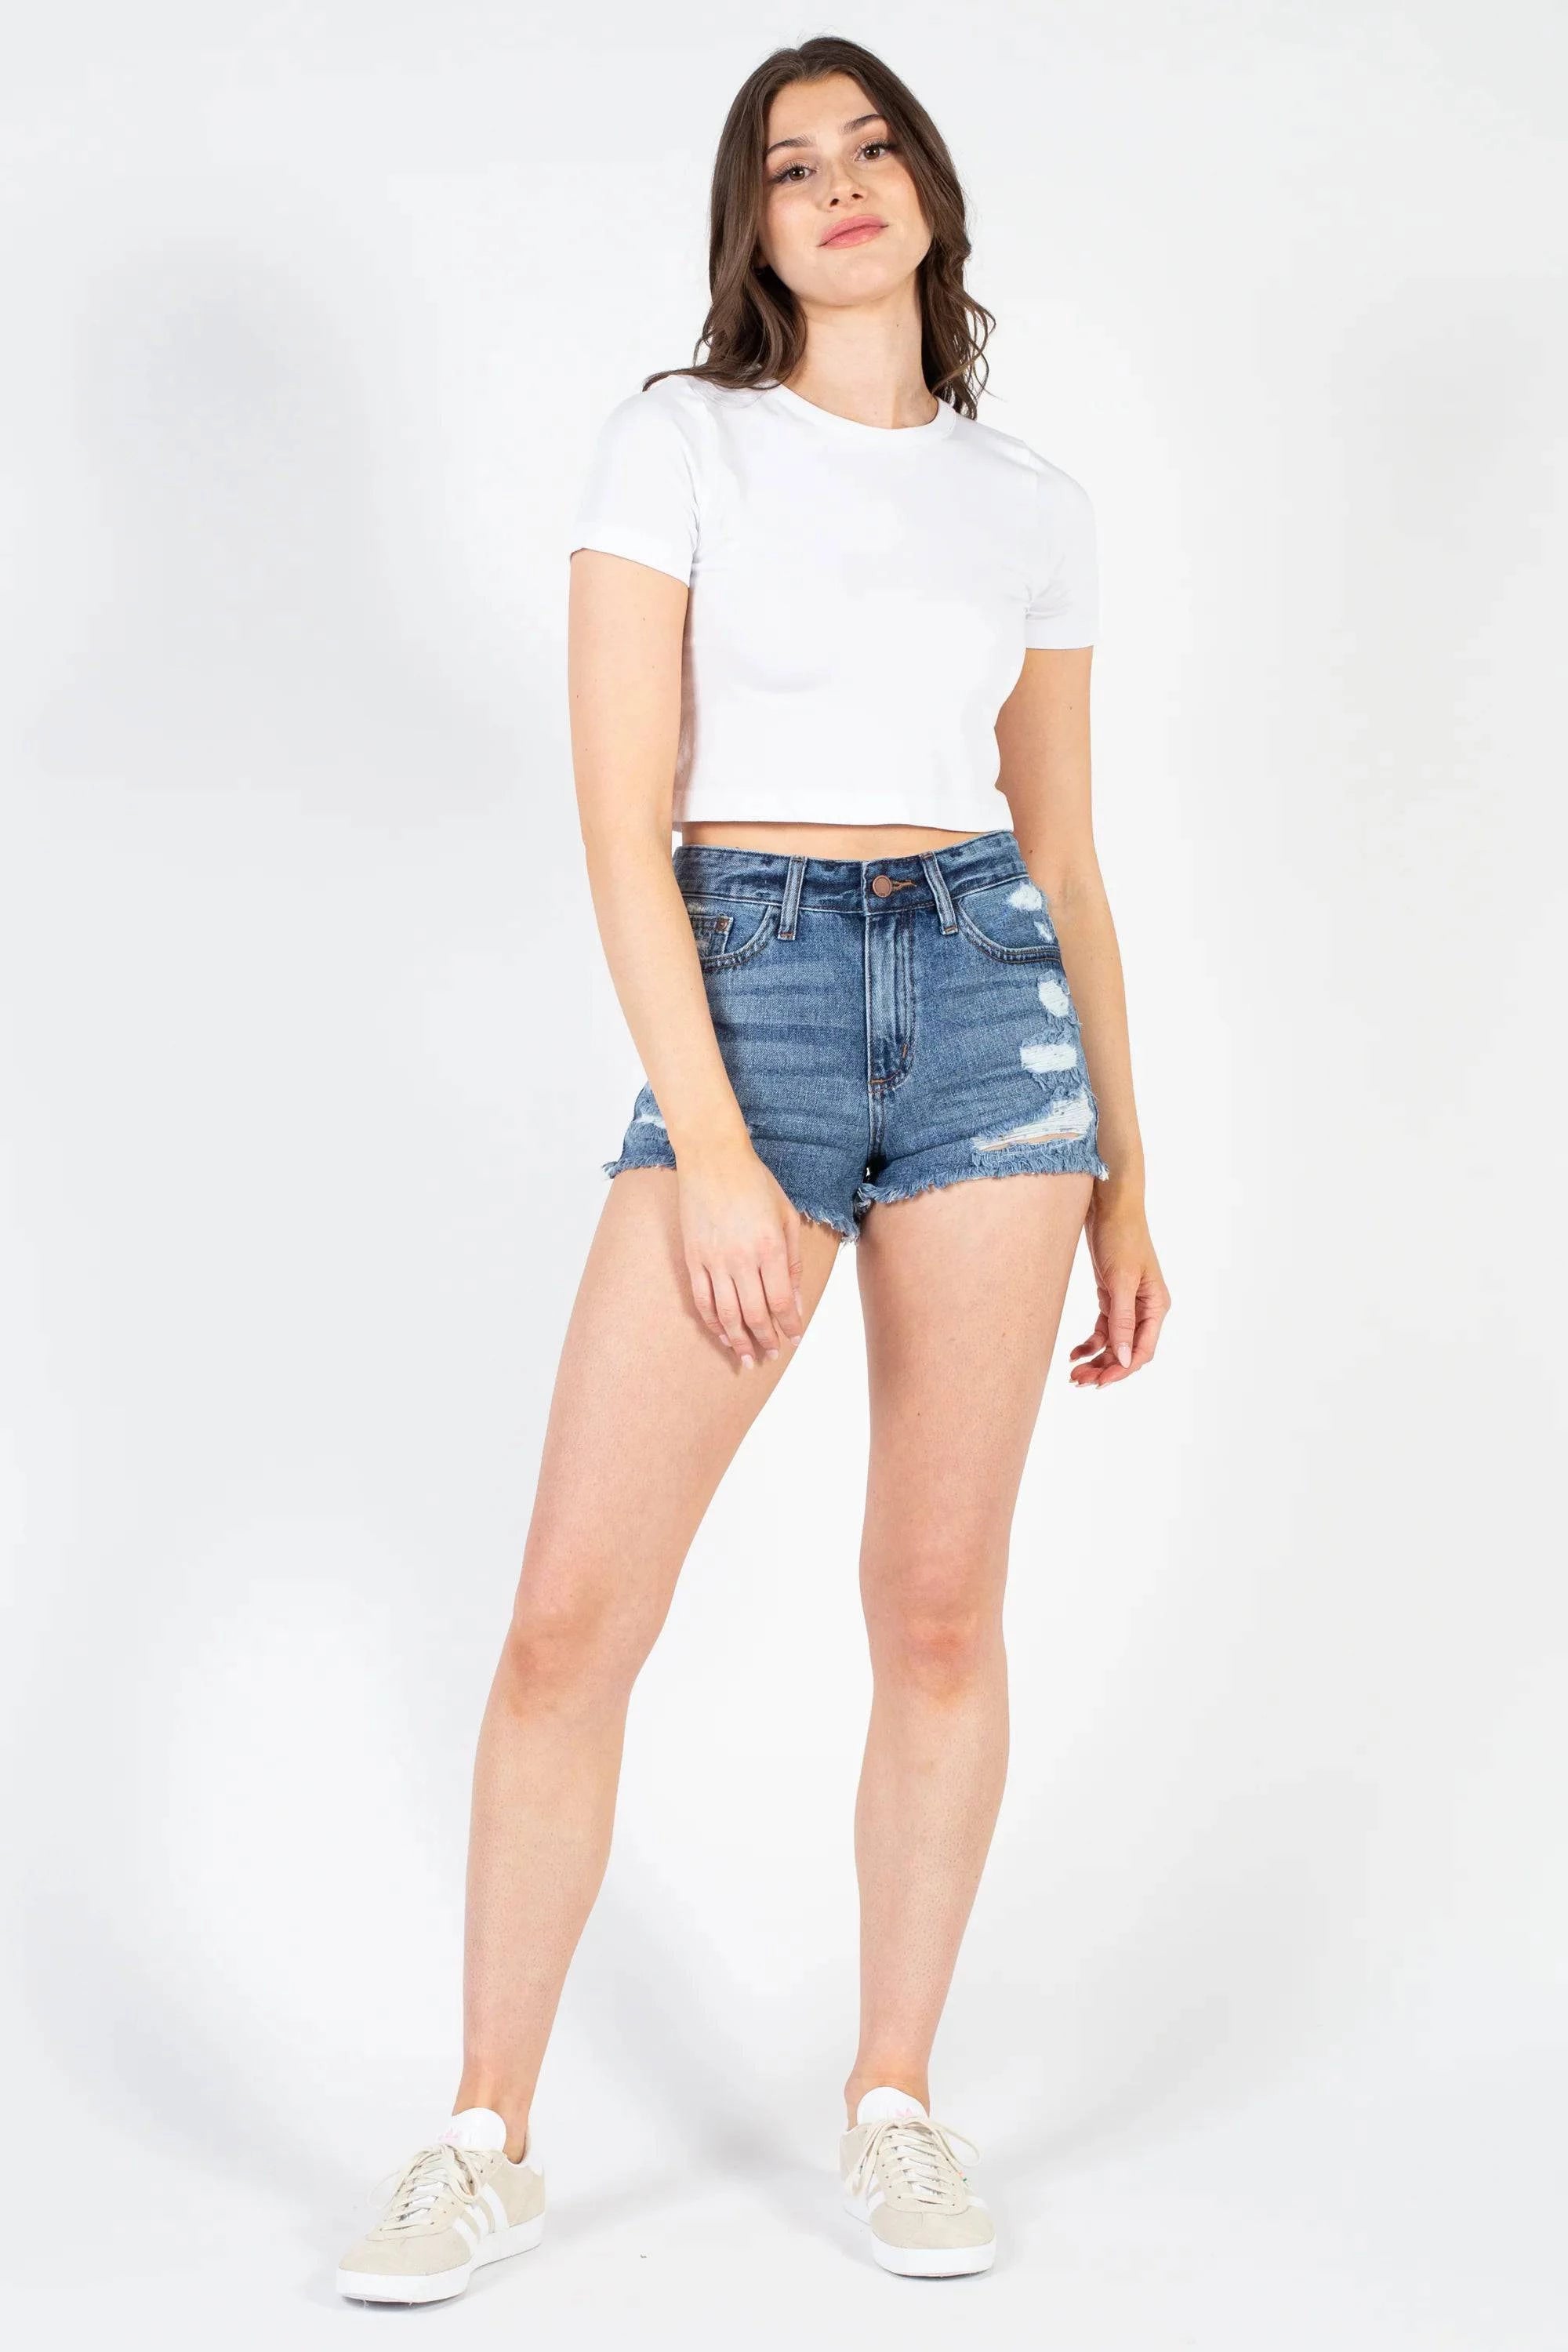 BAMBOO CROP TOP - Out of the Blue